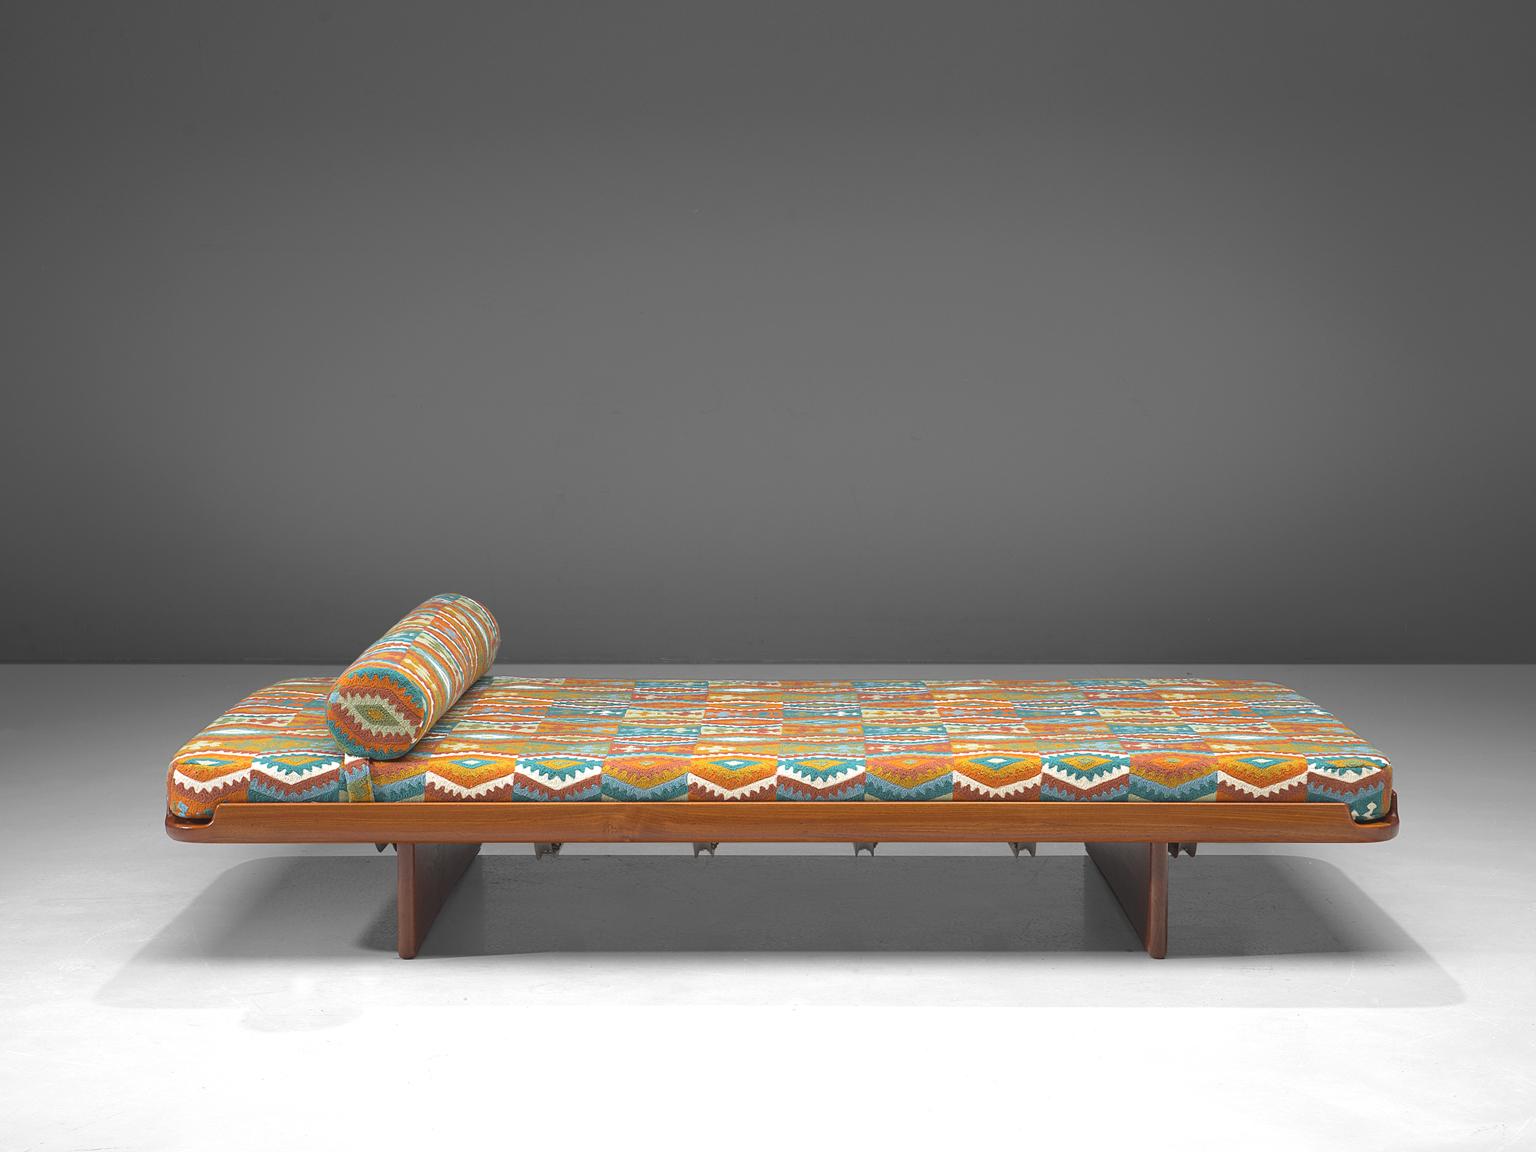 Grete Jalk for P.J. Furniture, reupholstered daybed, teak and fabric, Denmark, 1960s.

Scandinavian modern daybed by Danish designer Grete Jalk. The piece features a raised edge of the seat to keep het mattress in place. The reversible mattress